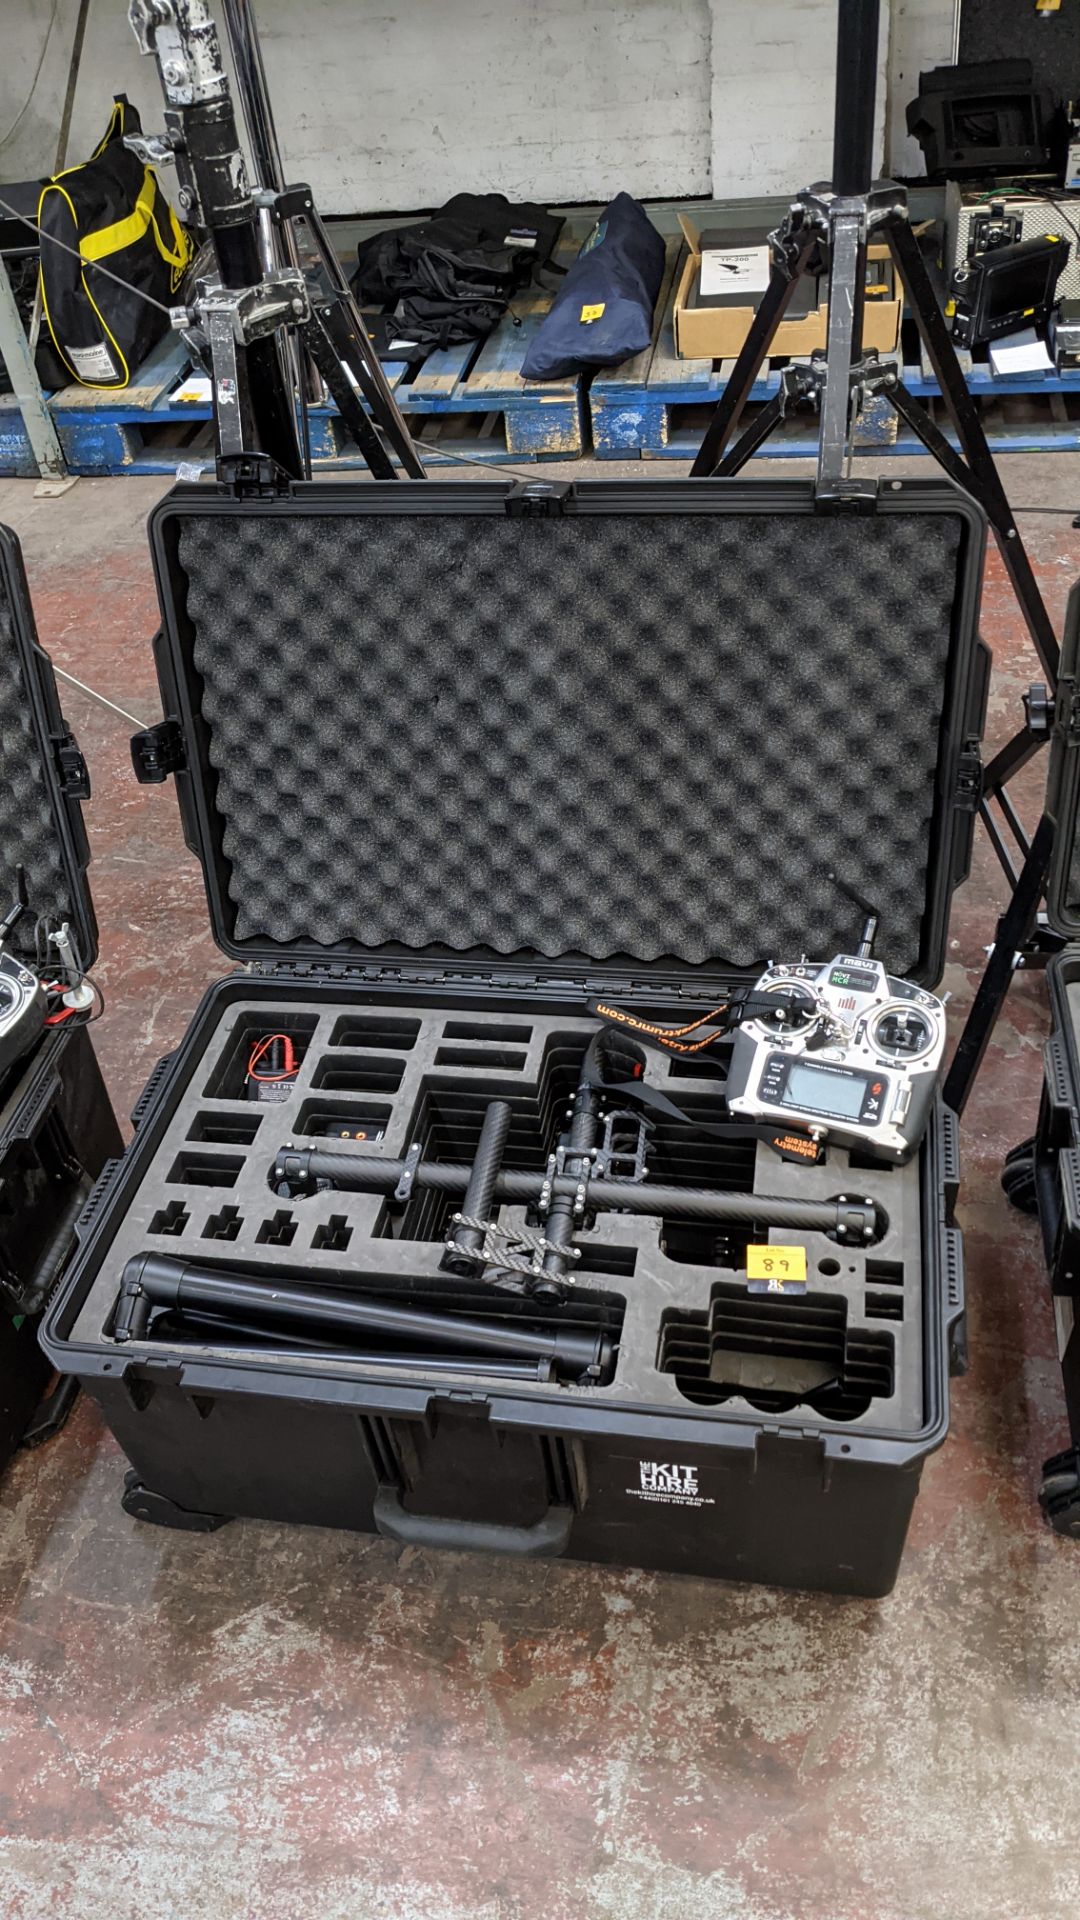 Freefly Movi M10 gimbal system with remote control including large case designed by Cinema Oxide - Image 3 of 16